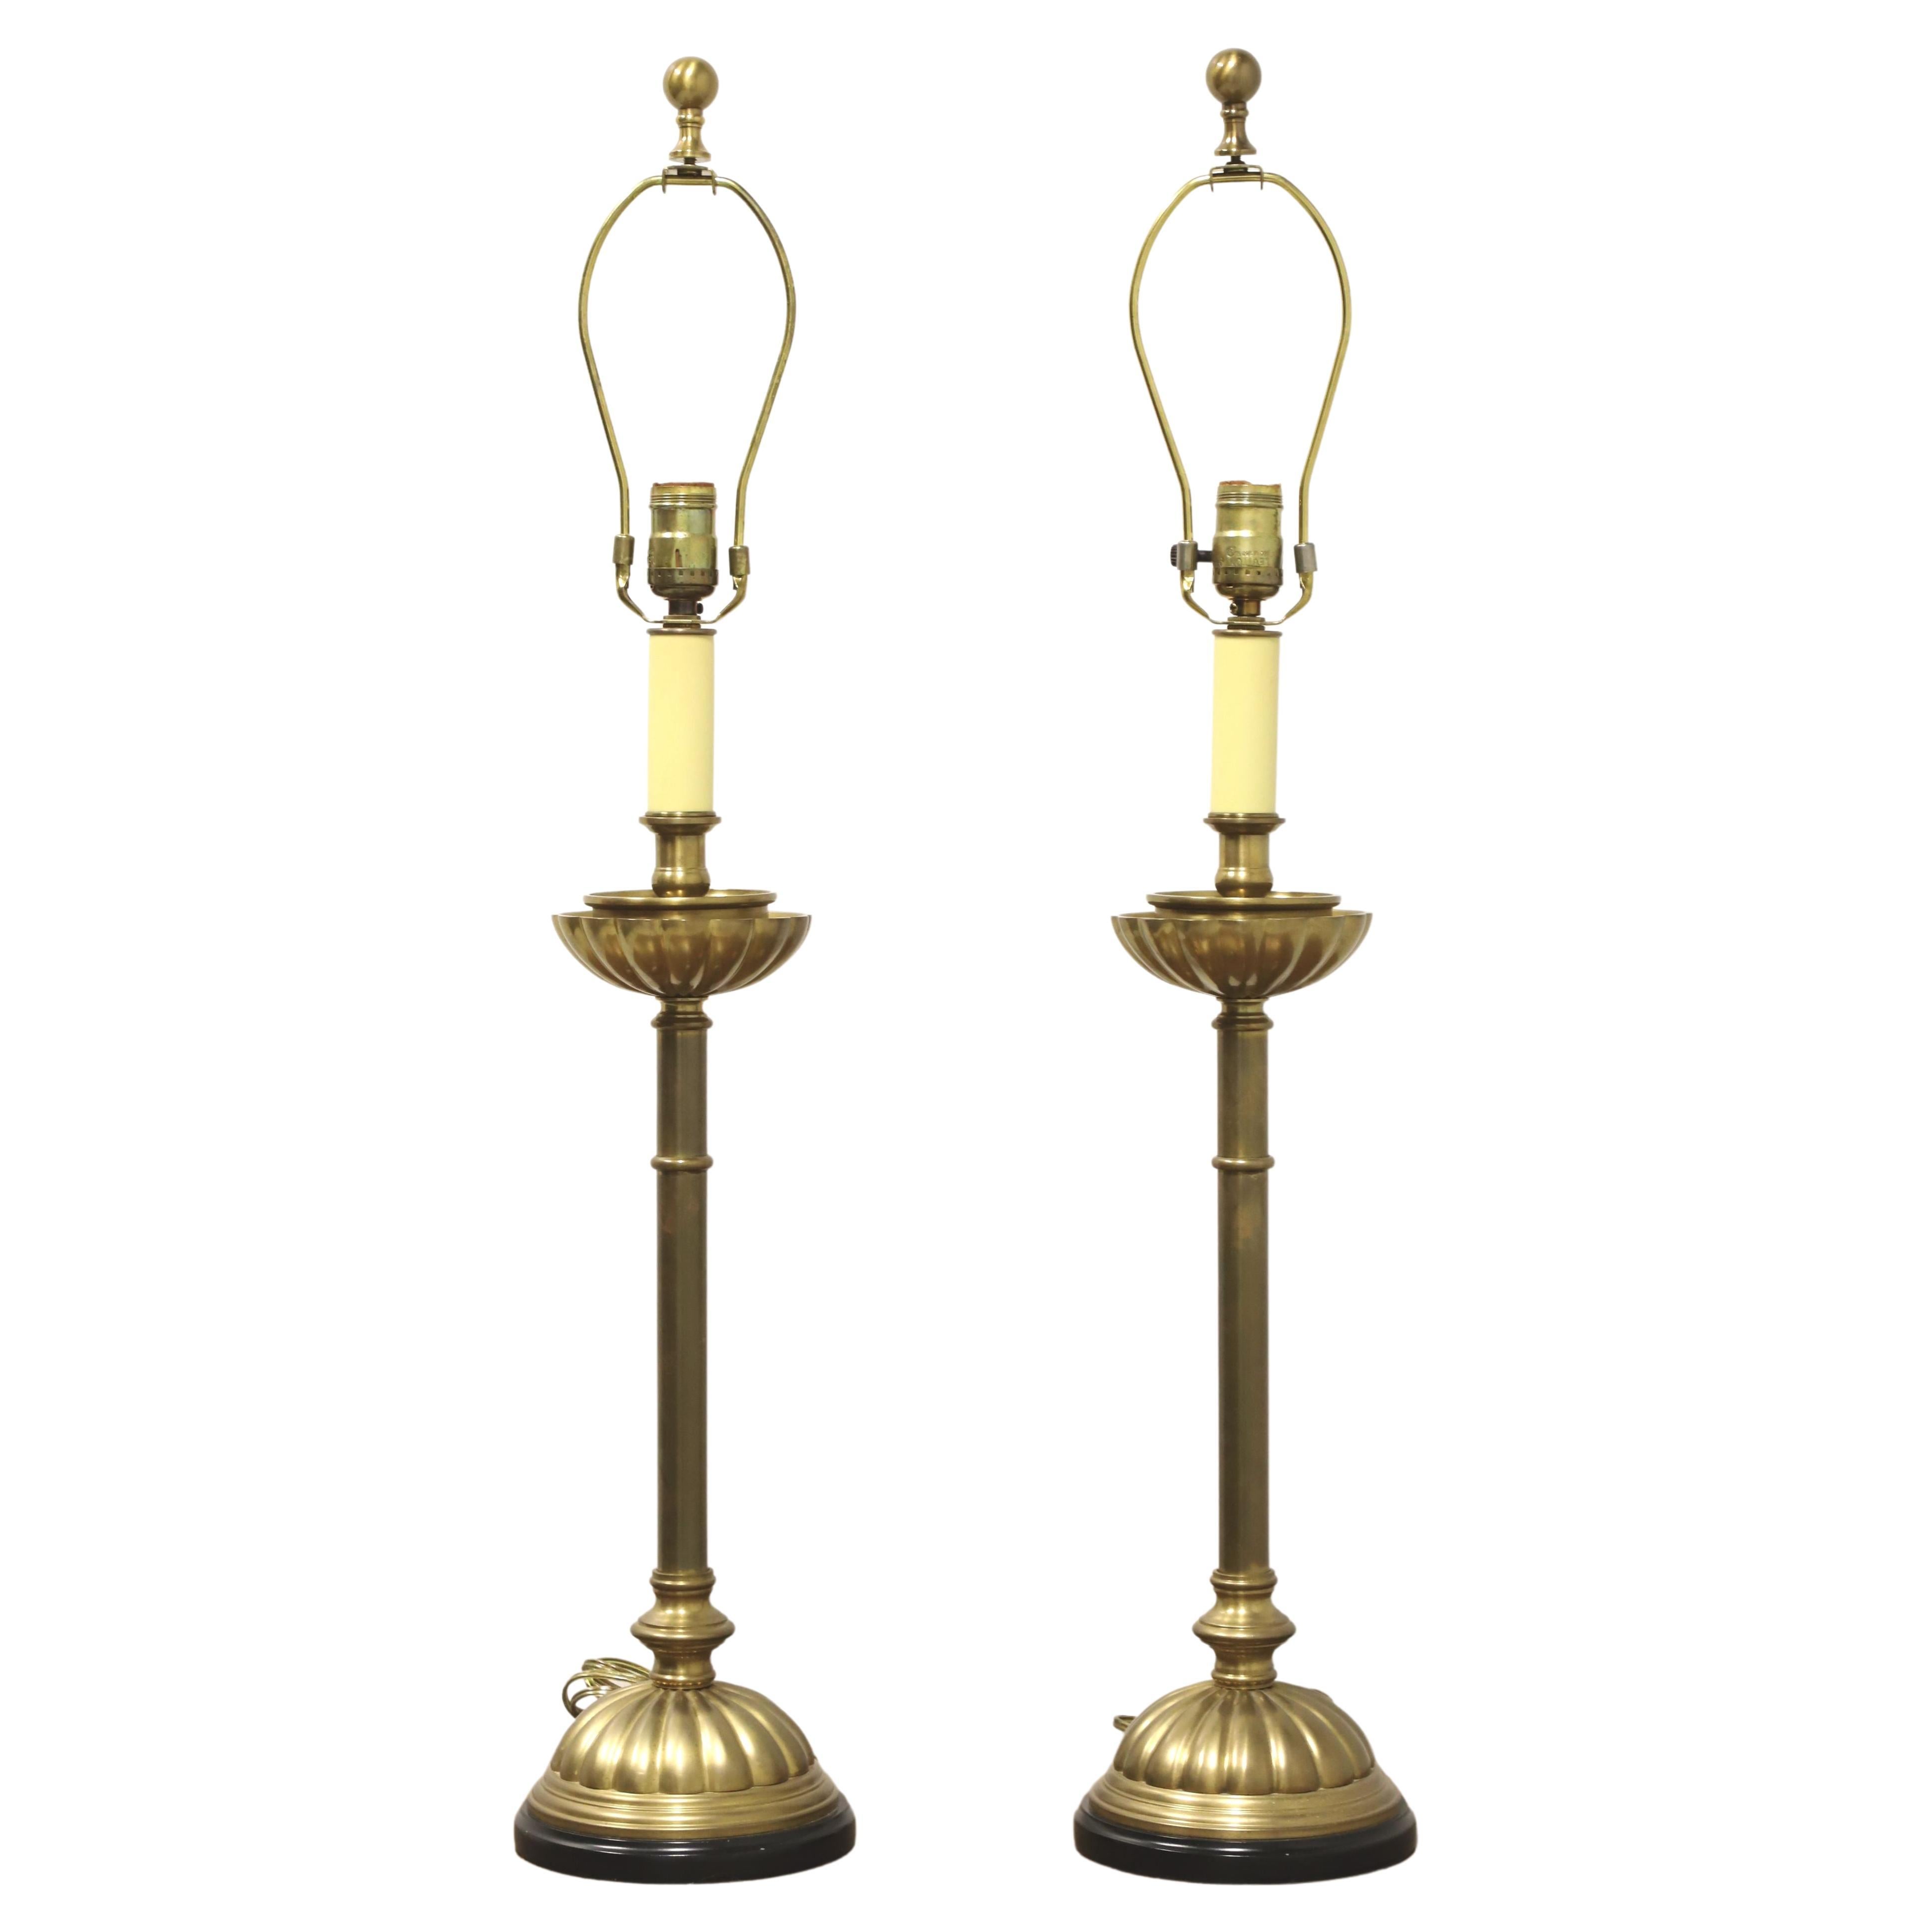 Vintage Brass Traditional Candlestick Table Lamps - Pair